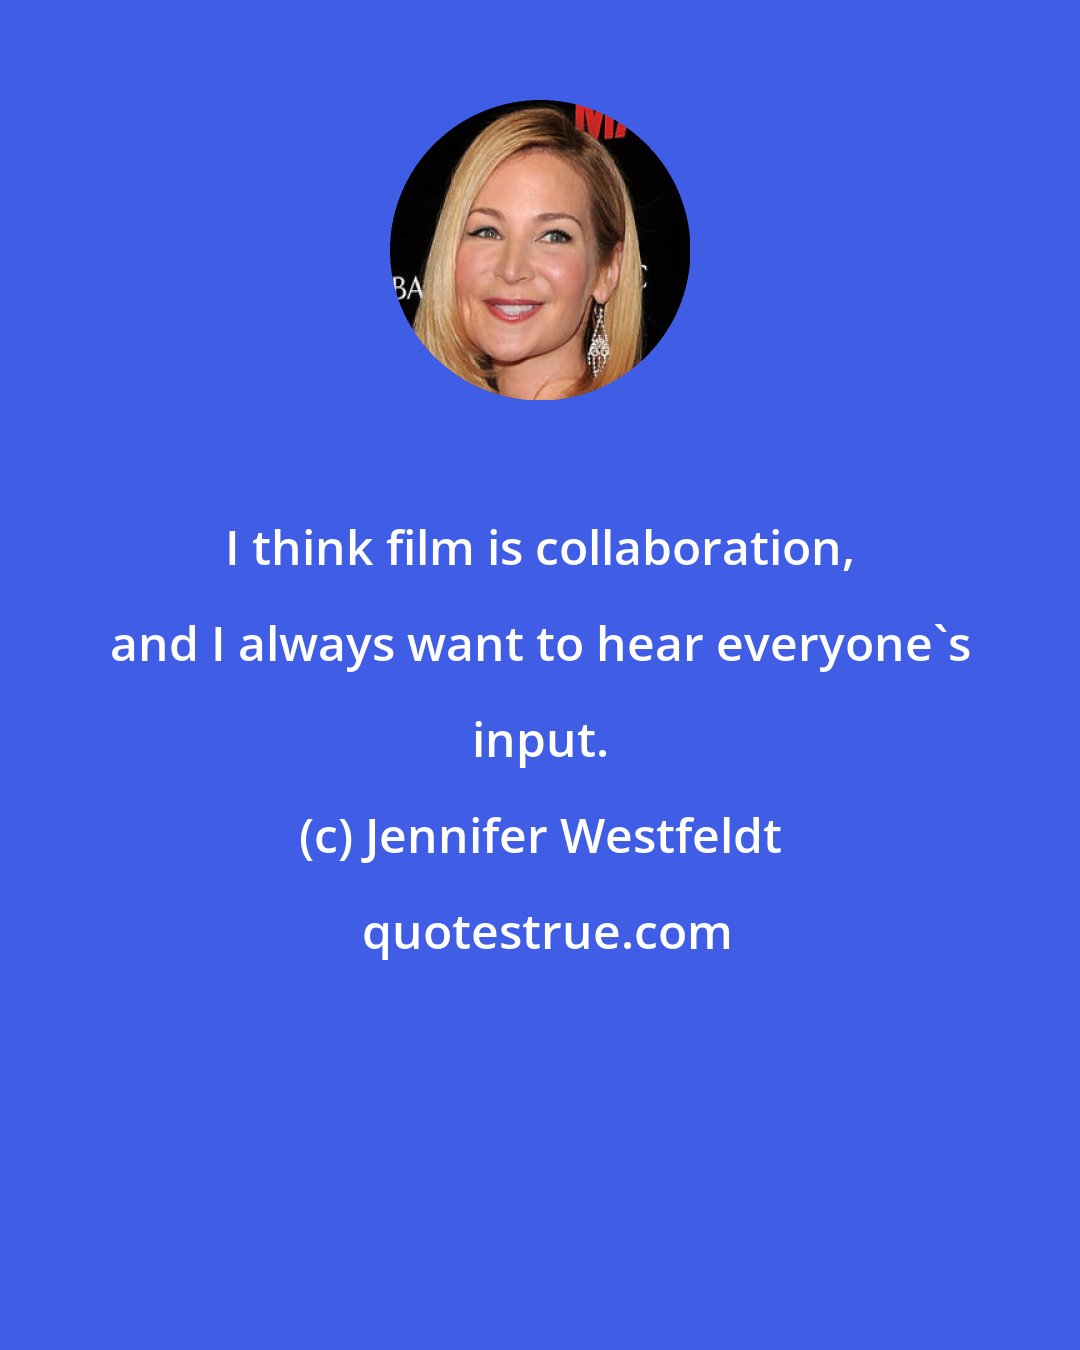 Jennifer Westfeldt: I think film is collaboration, and I always want to hear everyone's input.